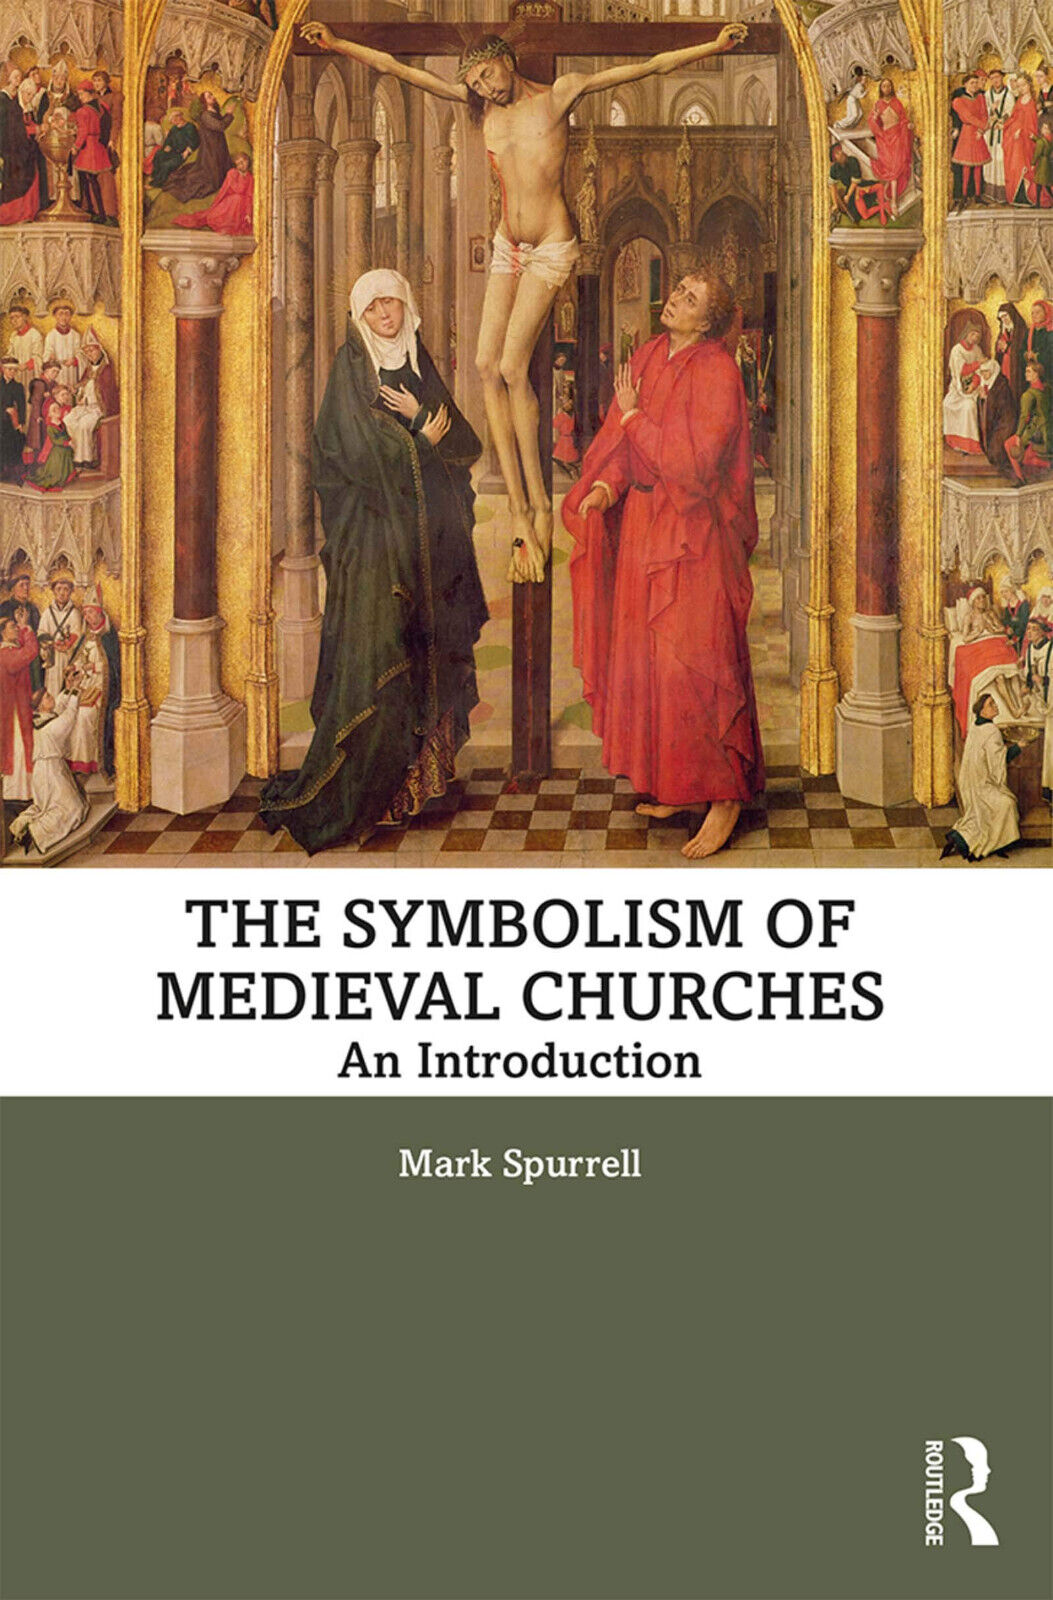 Medieval Church Symbolism - Mark Spurrell - Routledge, 2019